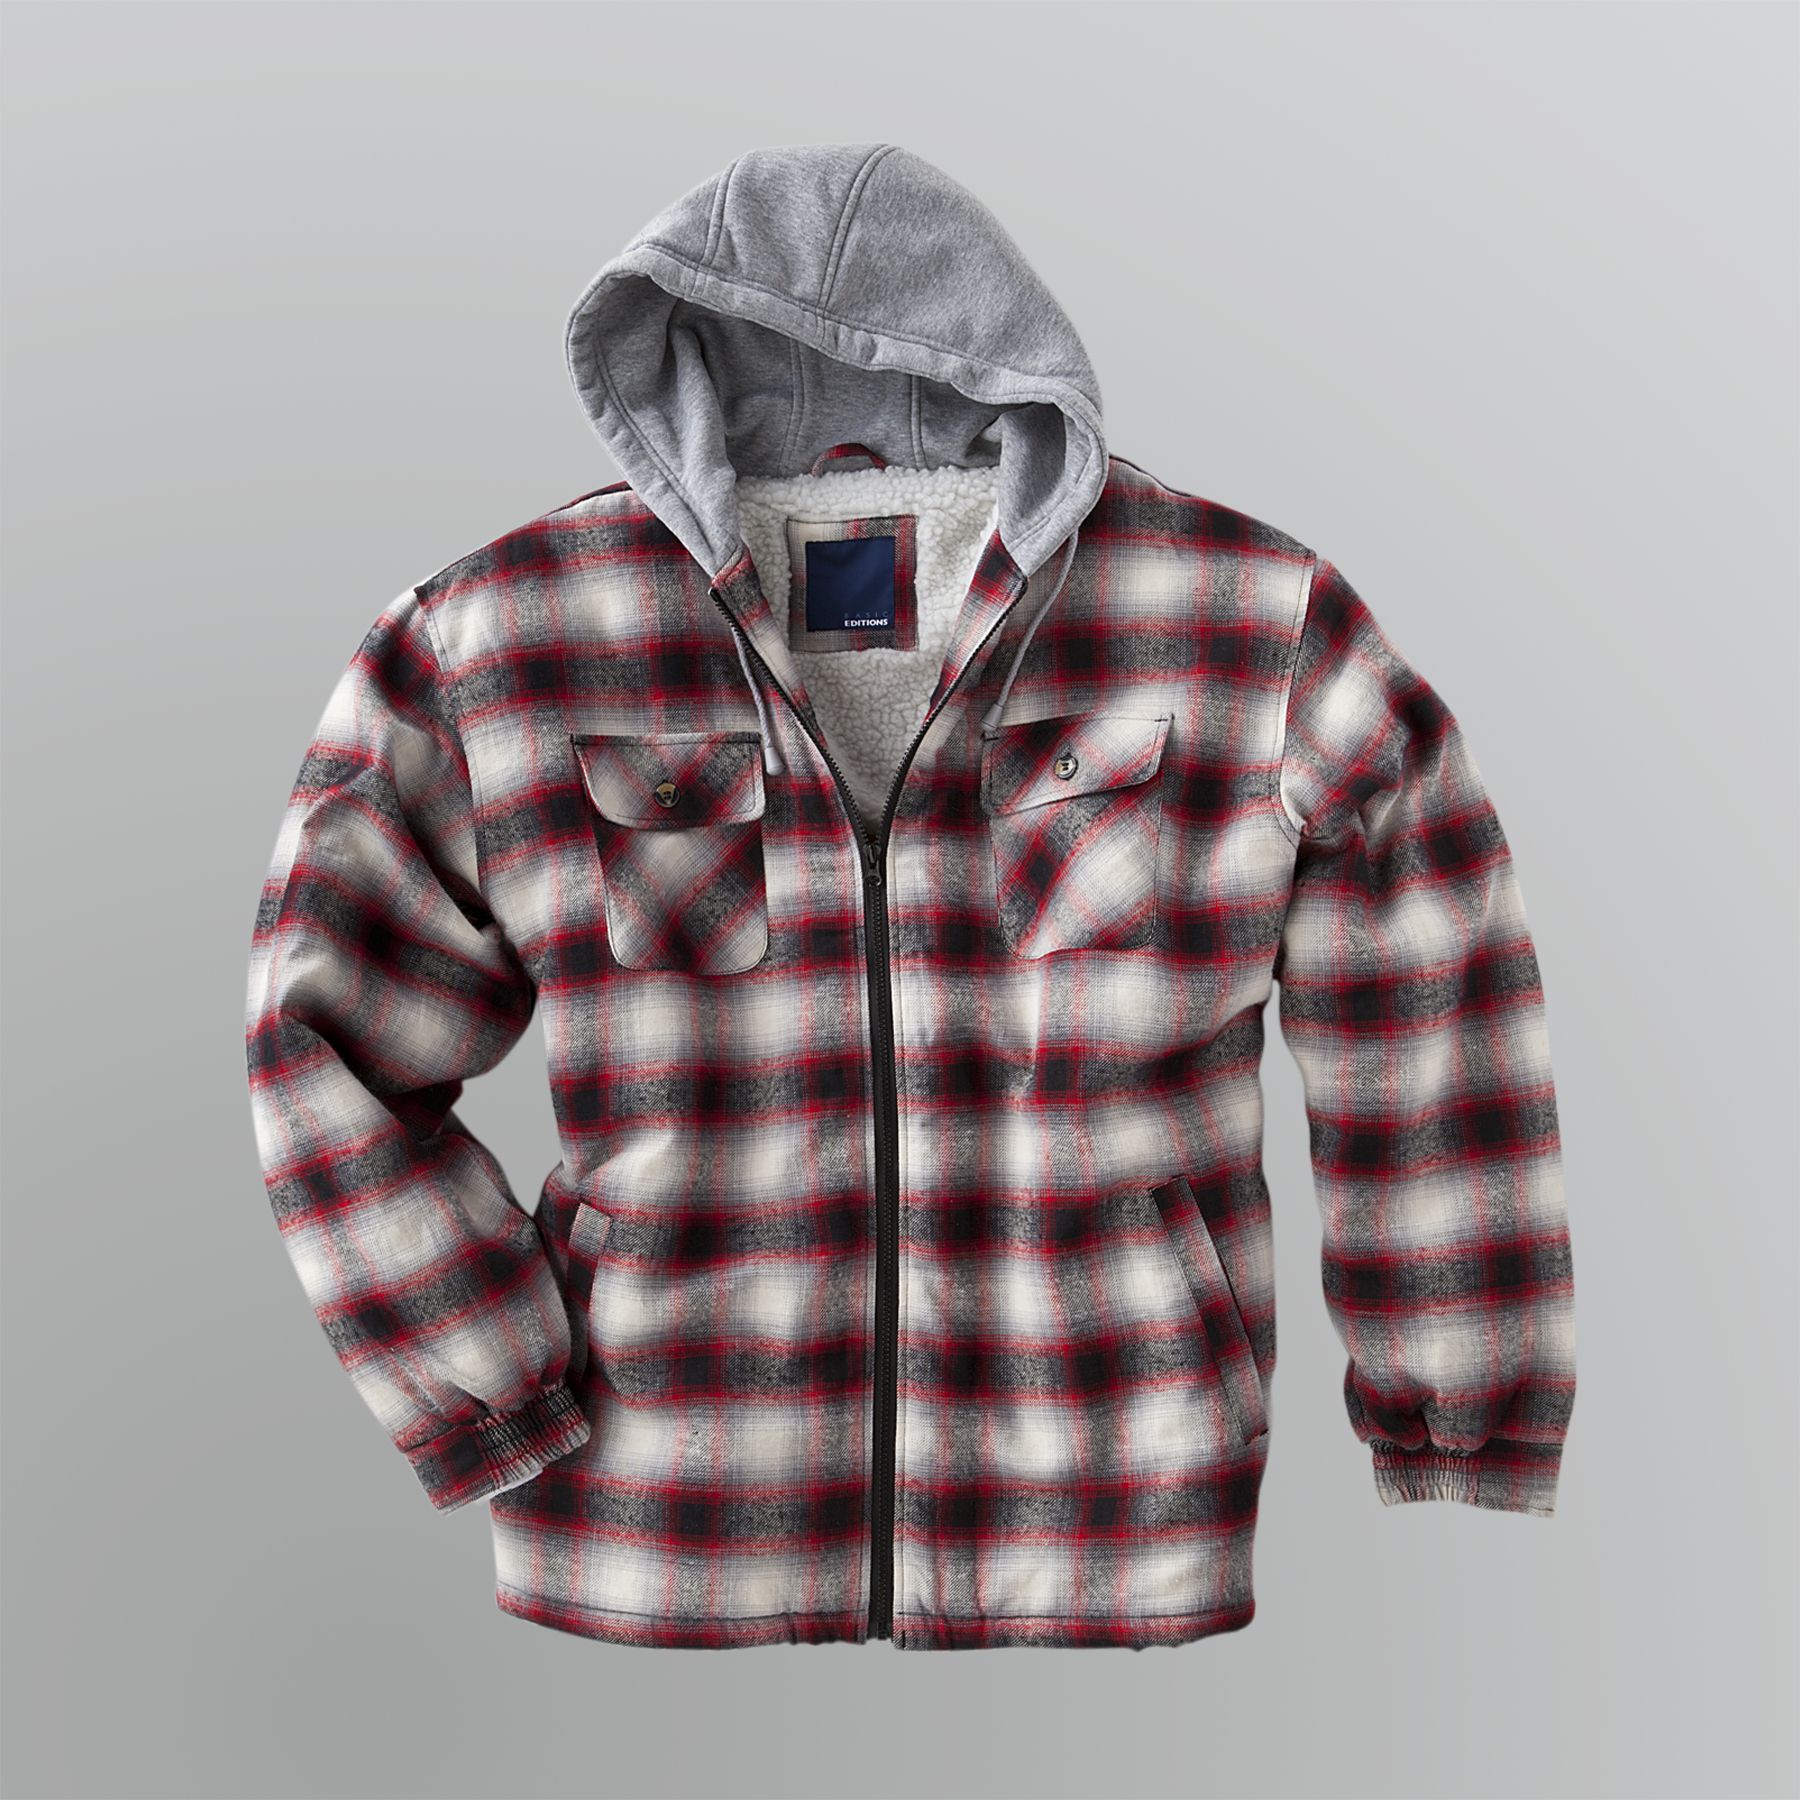 Basic Editions Men's Flannel Jacket with Sweat Shirt Hood